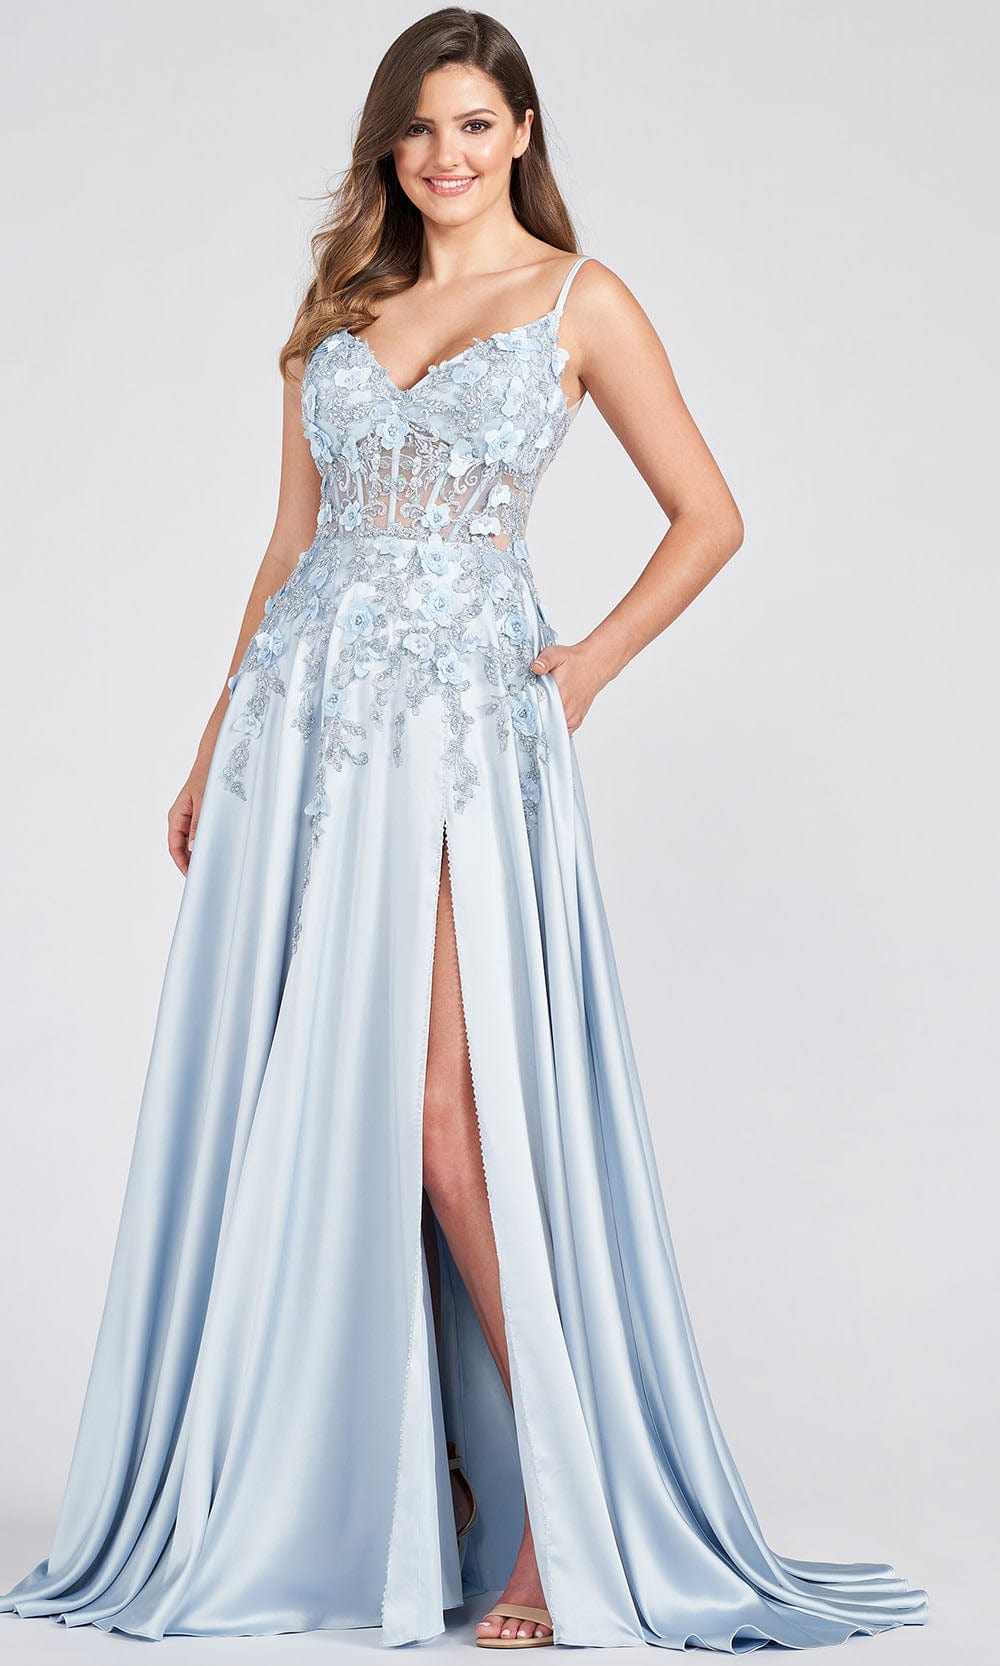 Ellie Wilde EW122038 - Plunging V Corset A Line Formal Gown Prom Dresses 00 / Dusty Blue